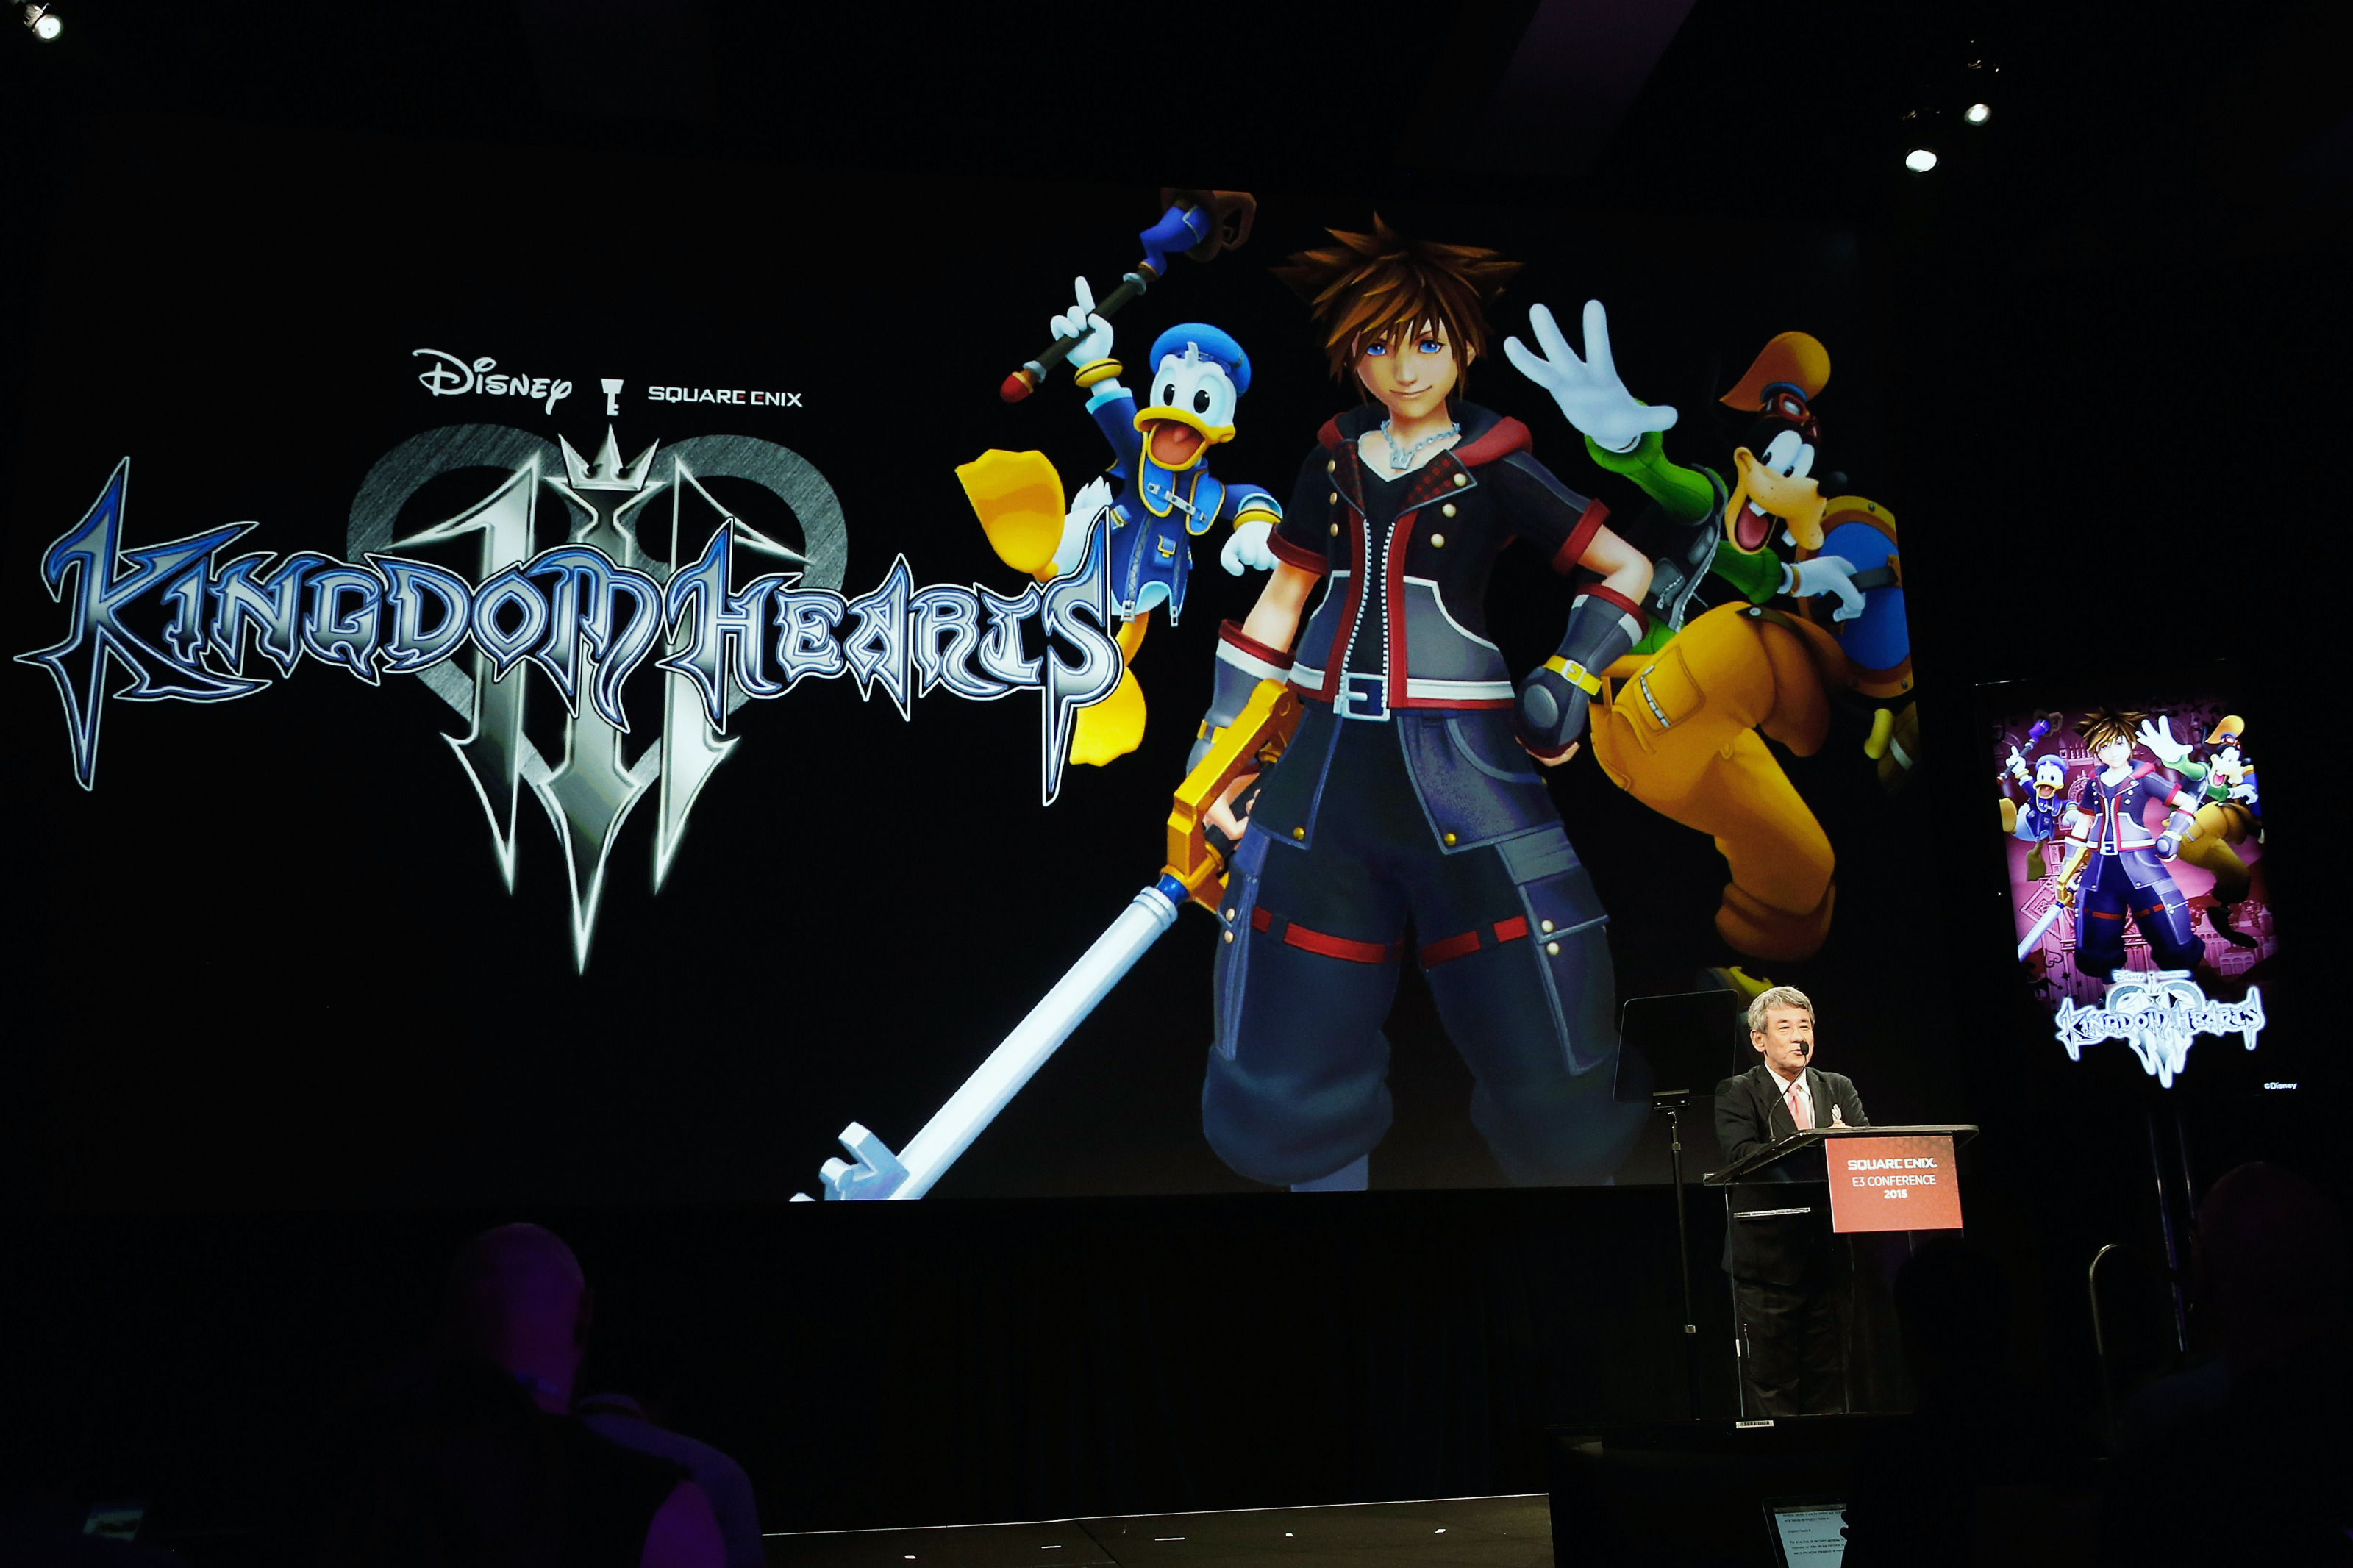 Kingdom Hearts series coming to Nintendo Switch in February 2022